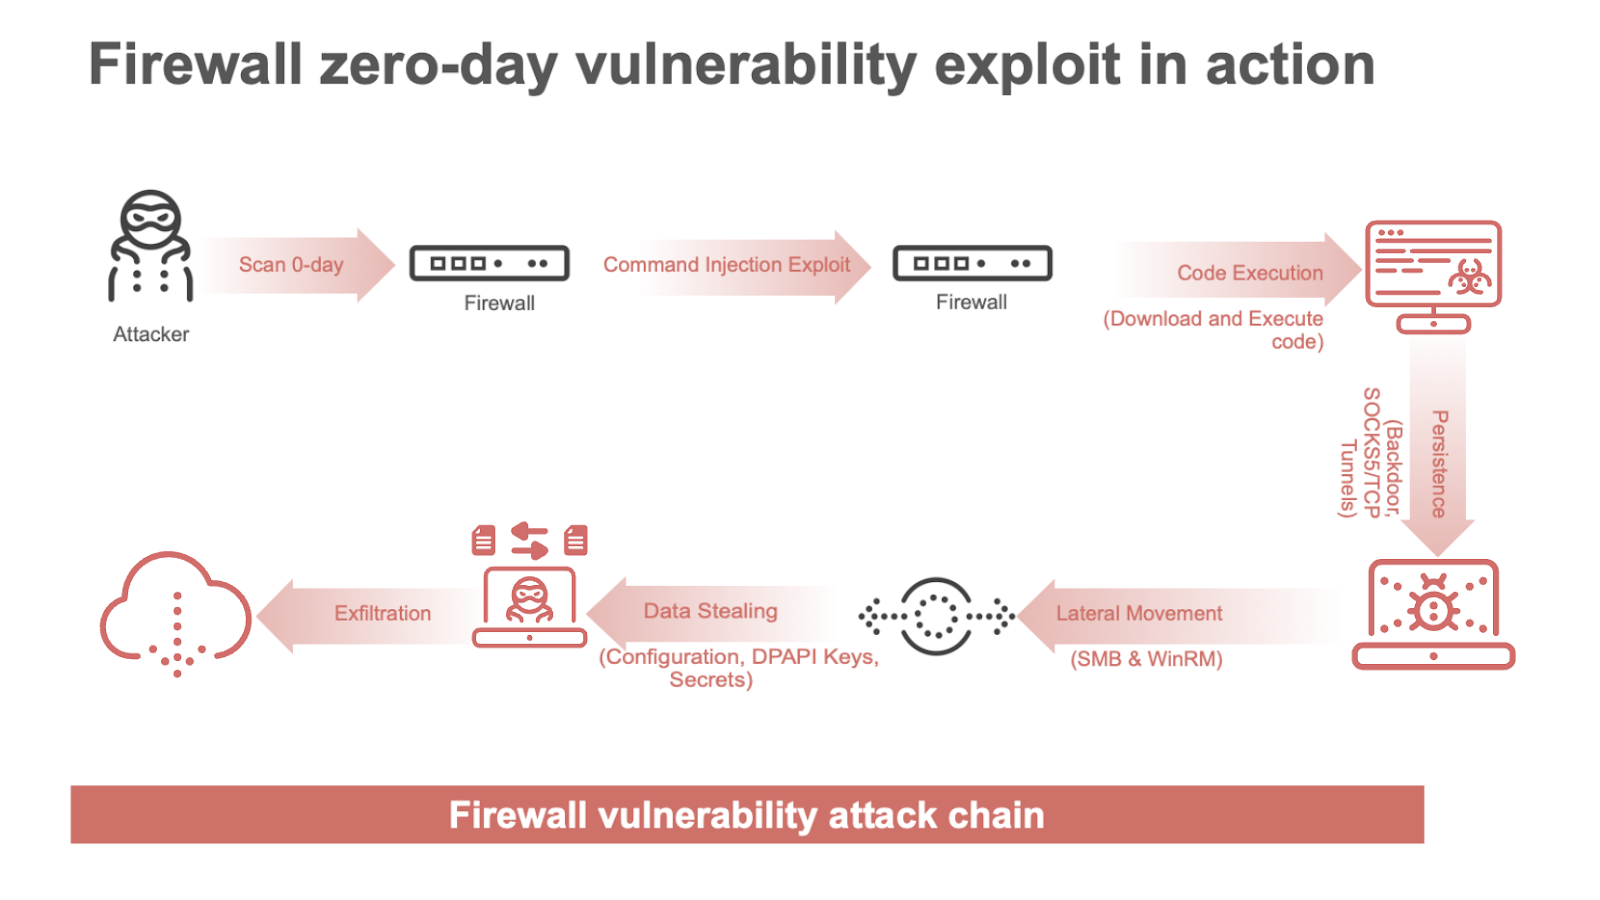 Figure 1: The possible firewall-based attack chain enabled by the PAN-OS zero day vulnerability. 